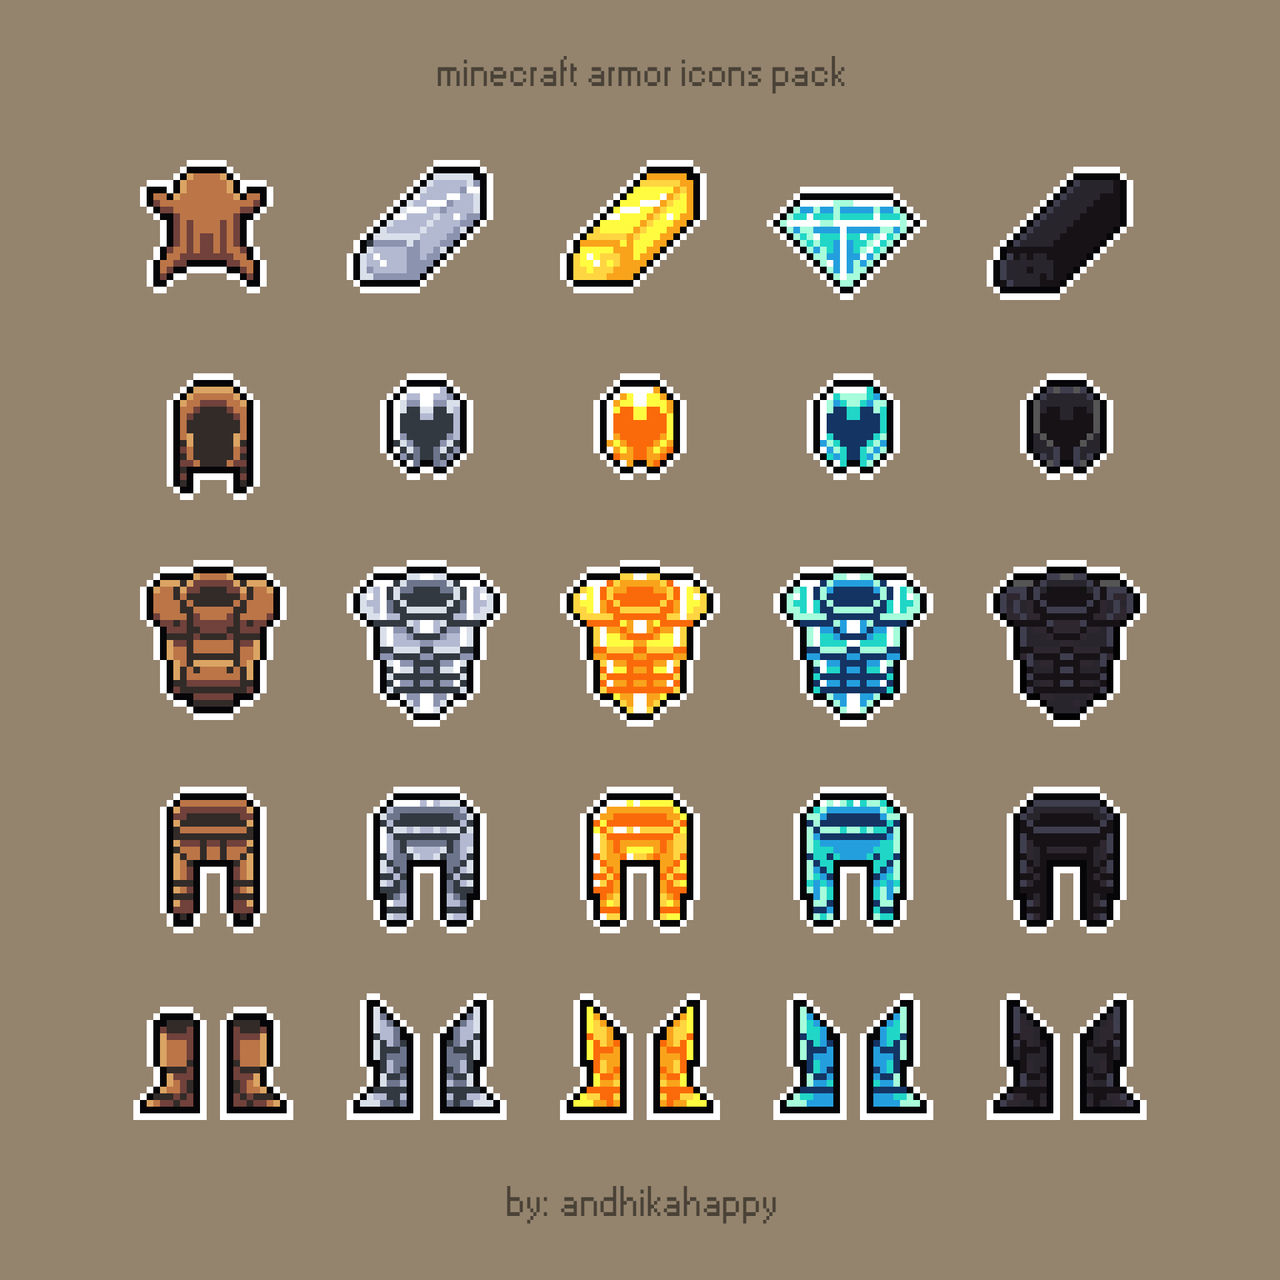 Minecraft Armor Icons Pack by AndhikArt on DeviantArt